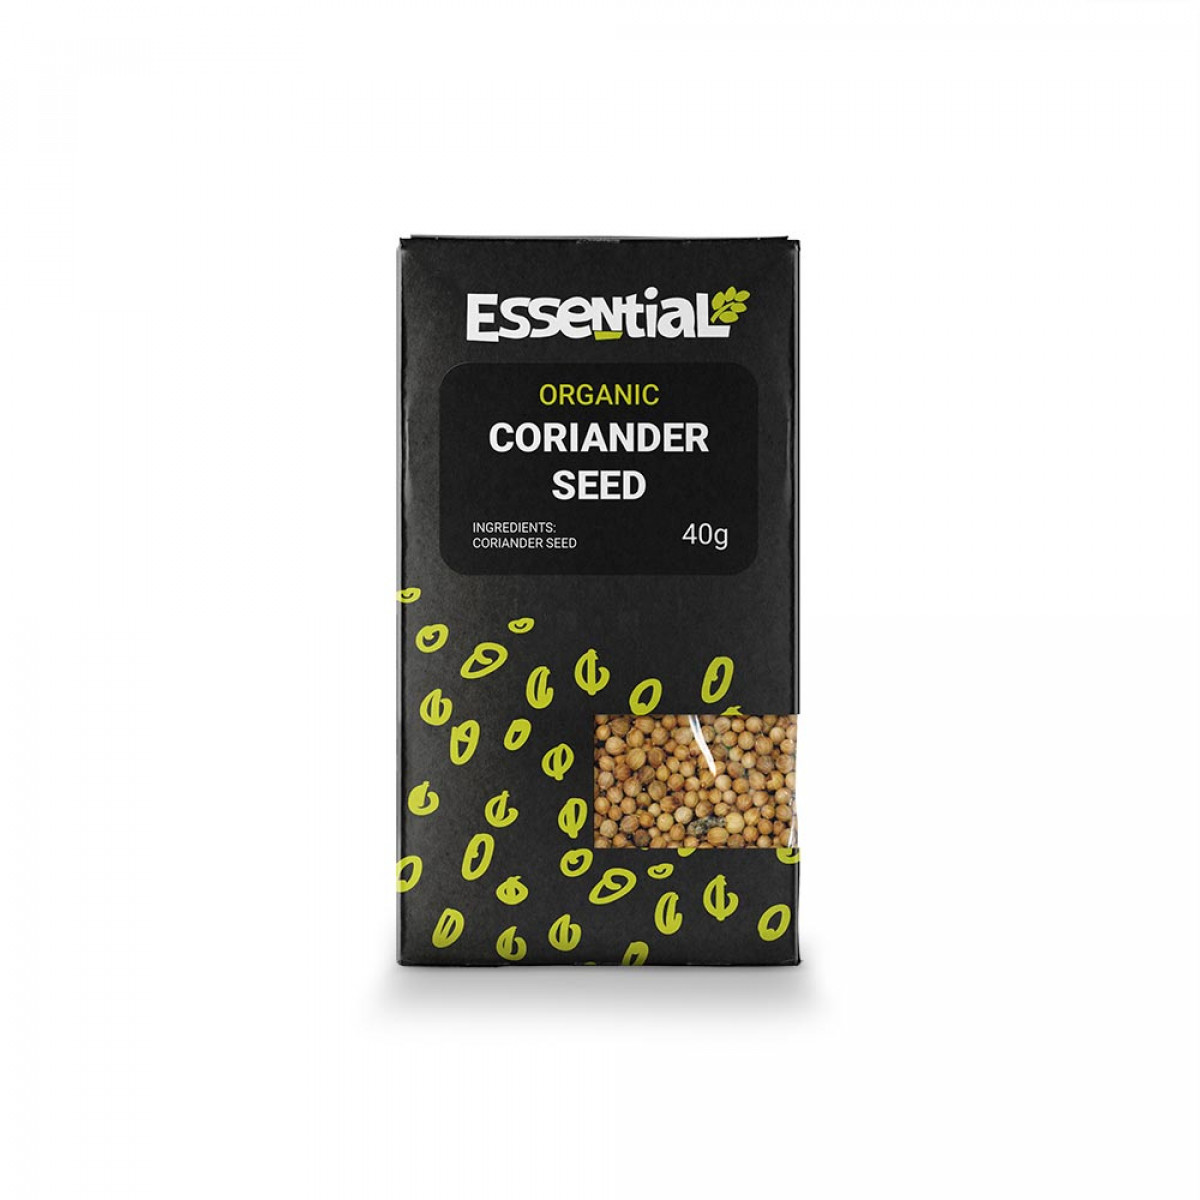 Product picture for Coriander Seed